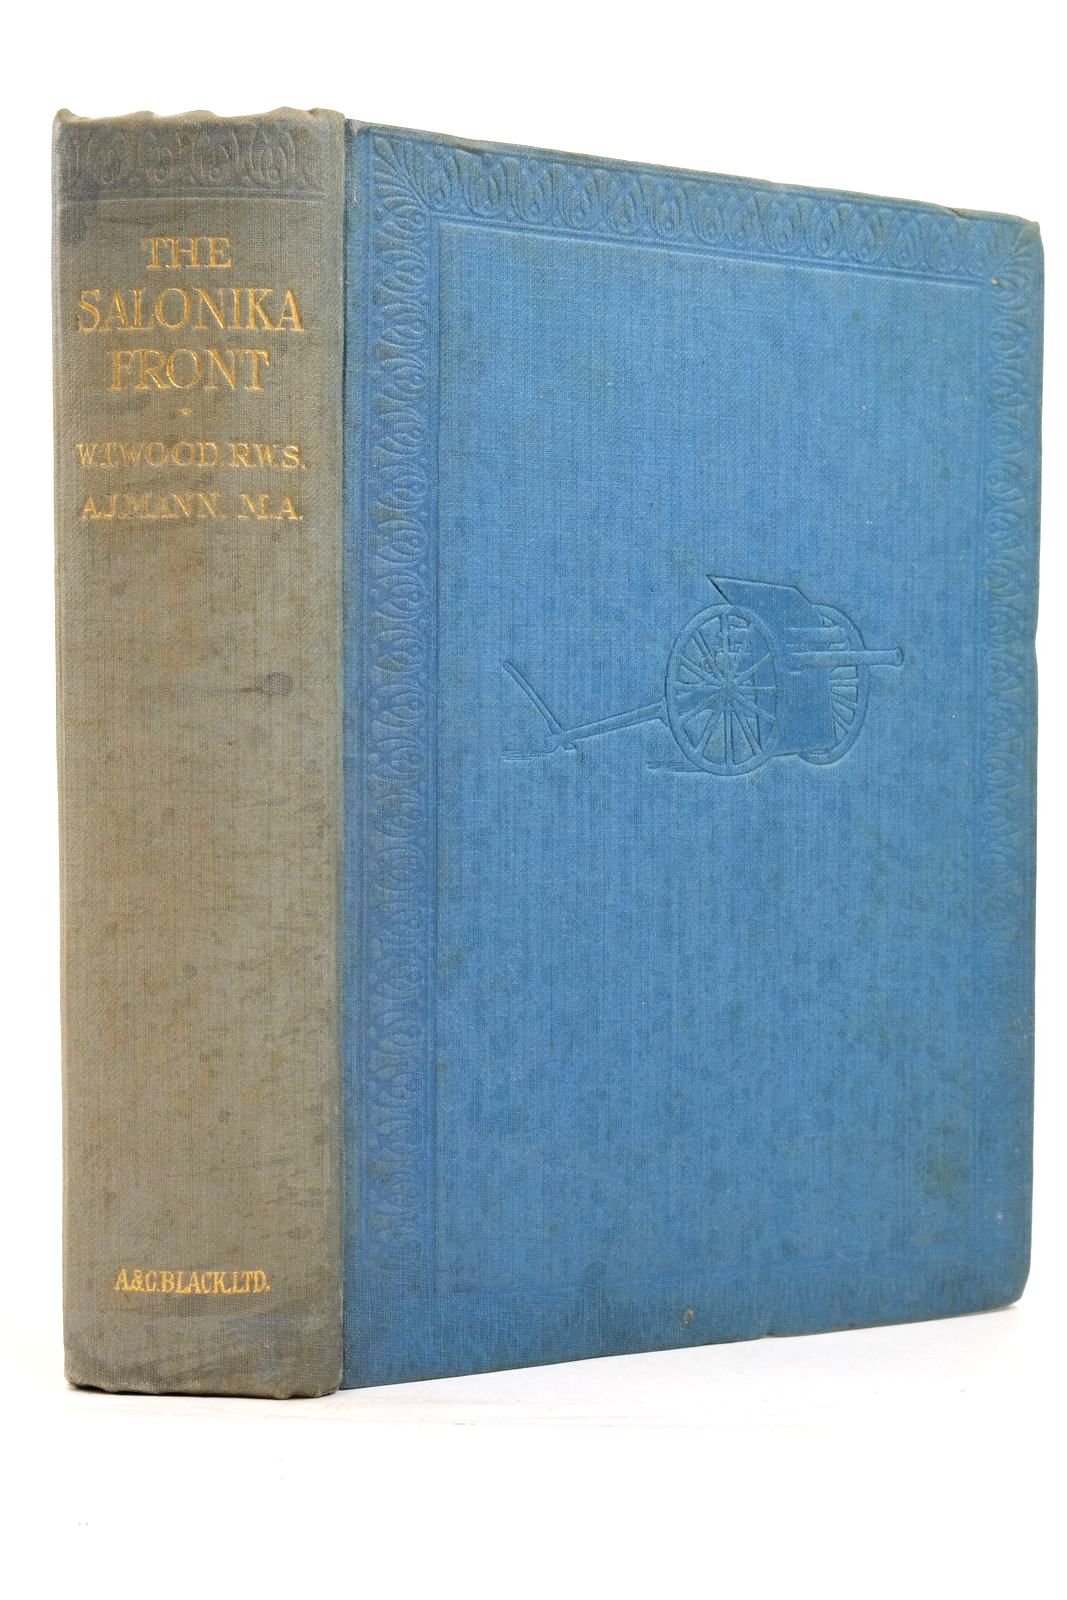 Photo of THE SALONIKA FRONT written by Mann, A.J. illustrated by Wood, William T. published by A. &amp; C. Black (STOCK CODE: 2137600)  for sale by Stella & Rose's Books